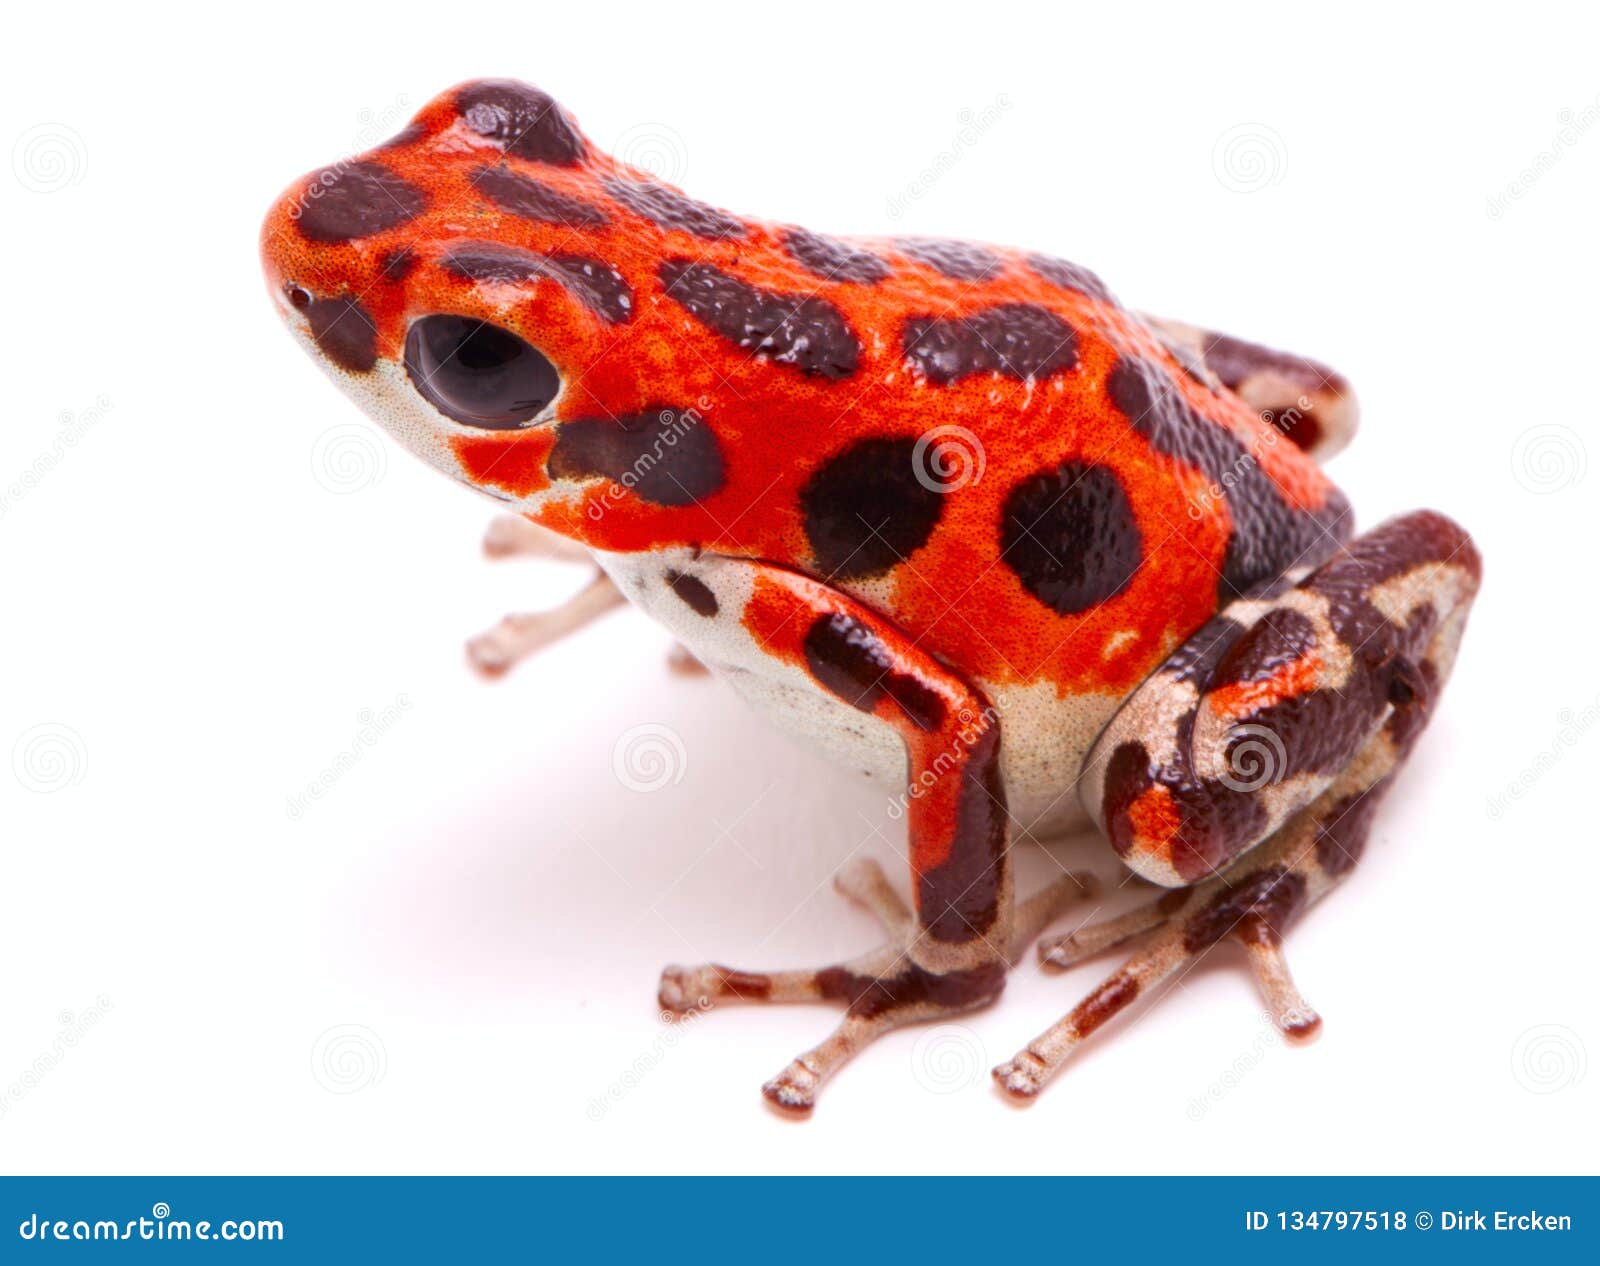 strawberry poison dart or arrow frog red frog beach